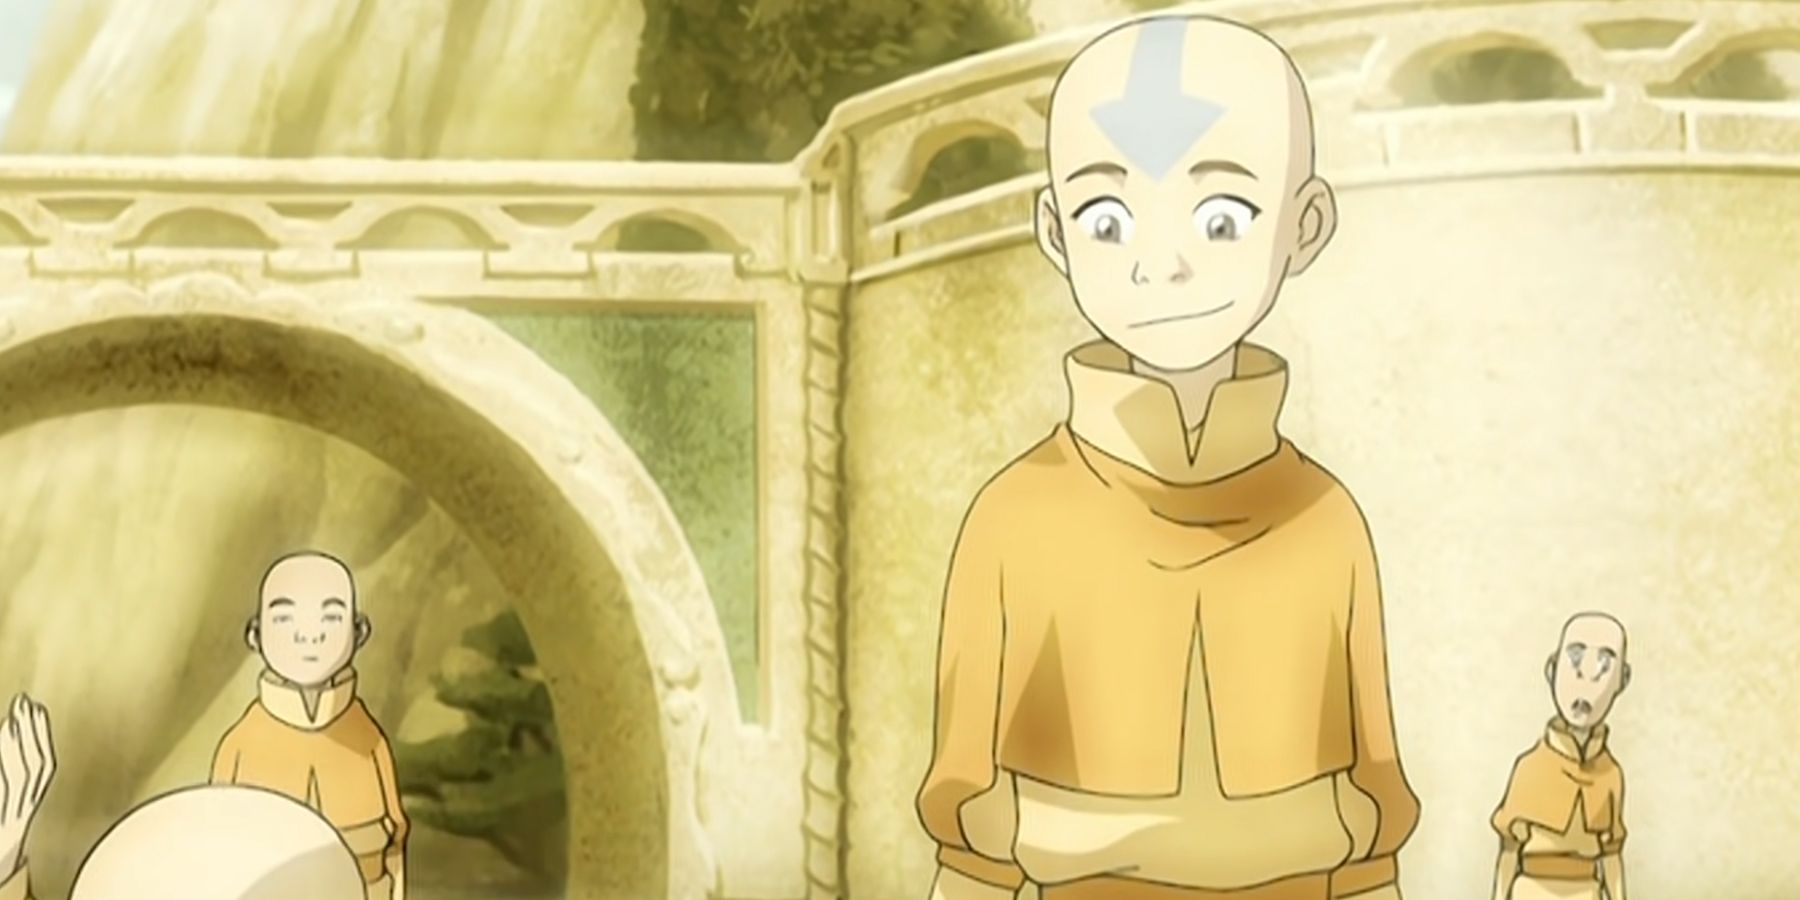 Aang as a child in the Last Airbender